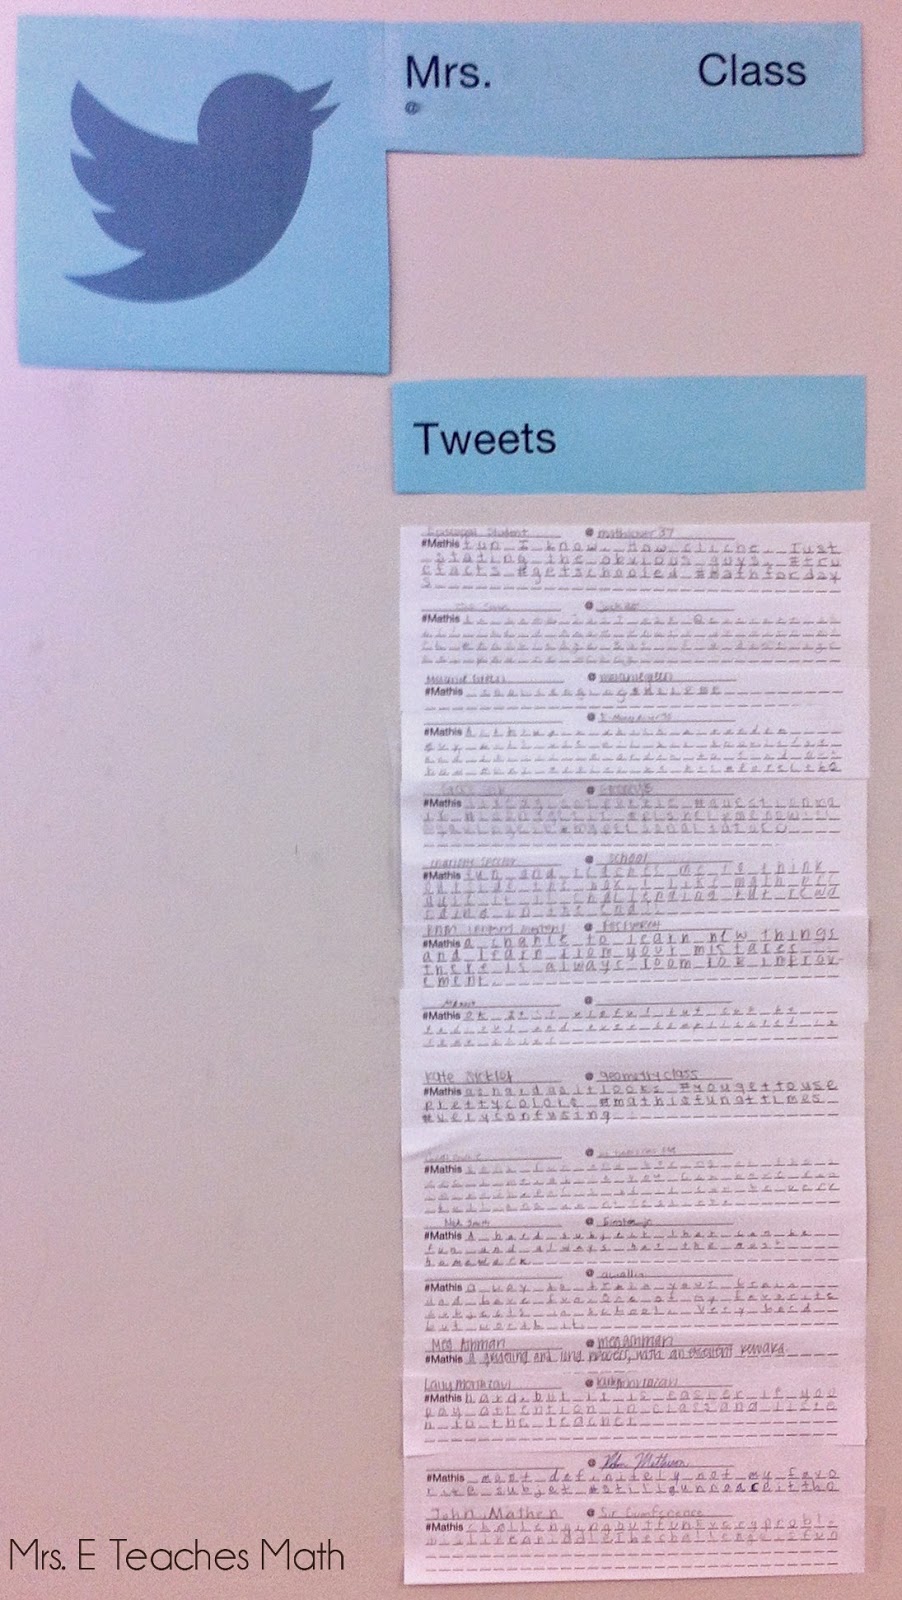 ... Math: Using Tweets as an Exit Ticket on the First Day of School